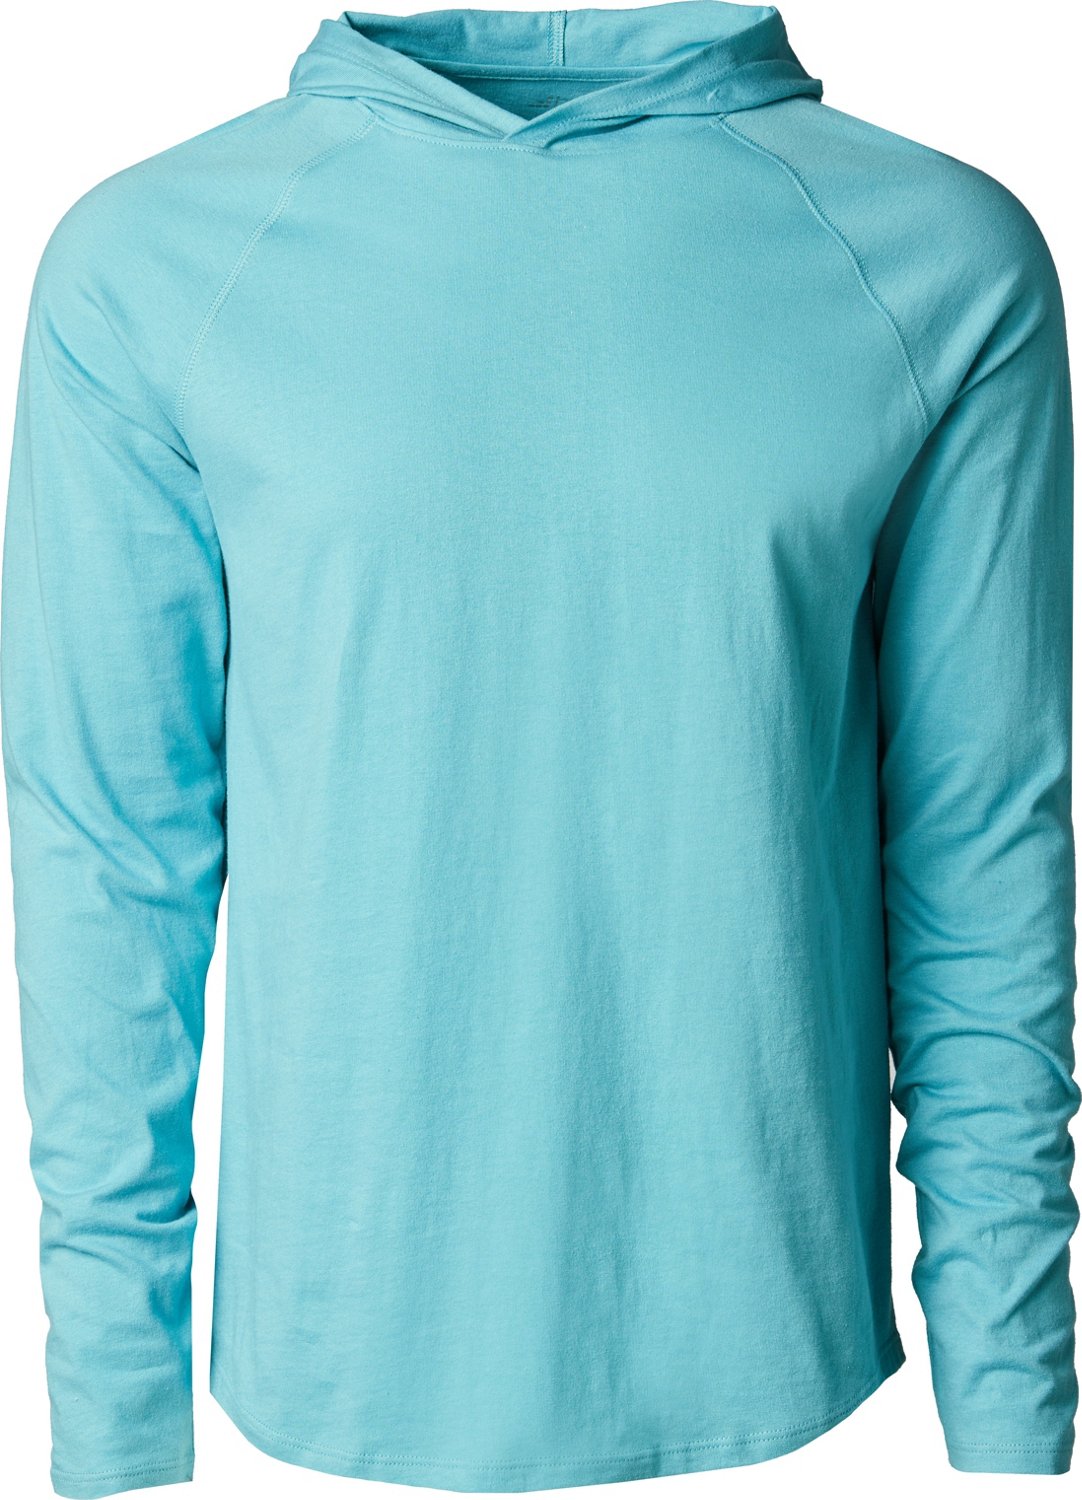 BCG Men’s Lifestyle Long Sleeve Hooded T-shirt | Academy